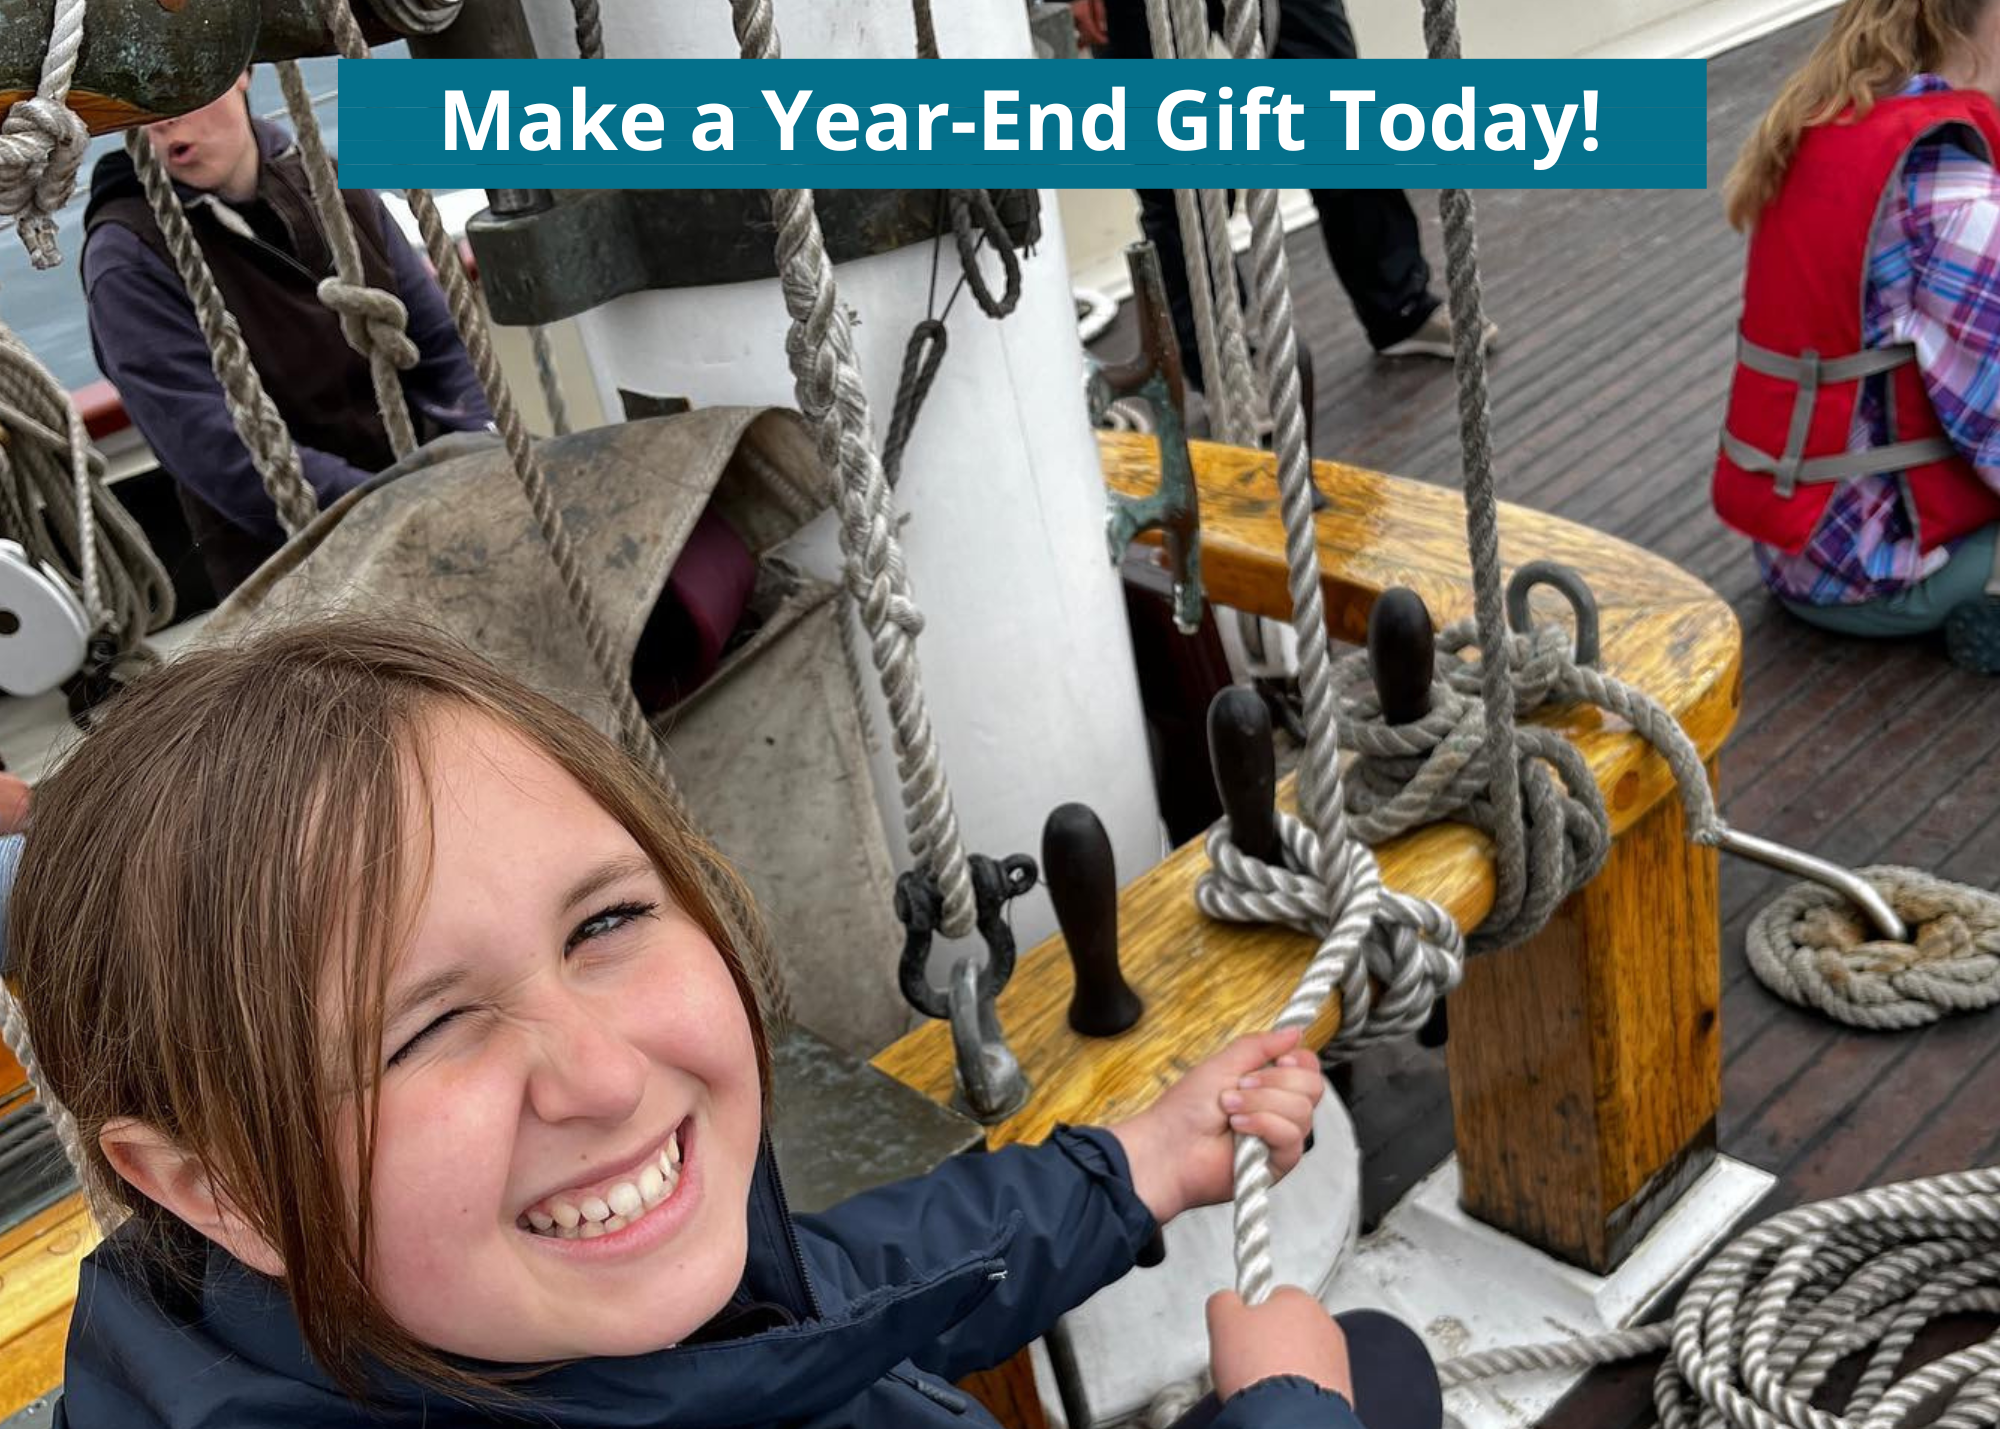 Make a Year-End Gift Today